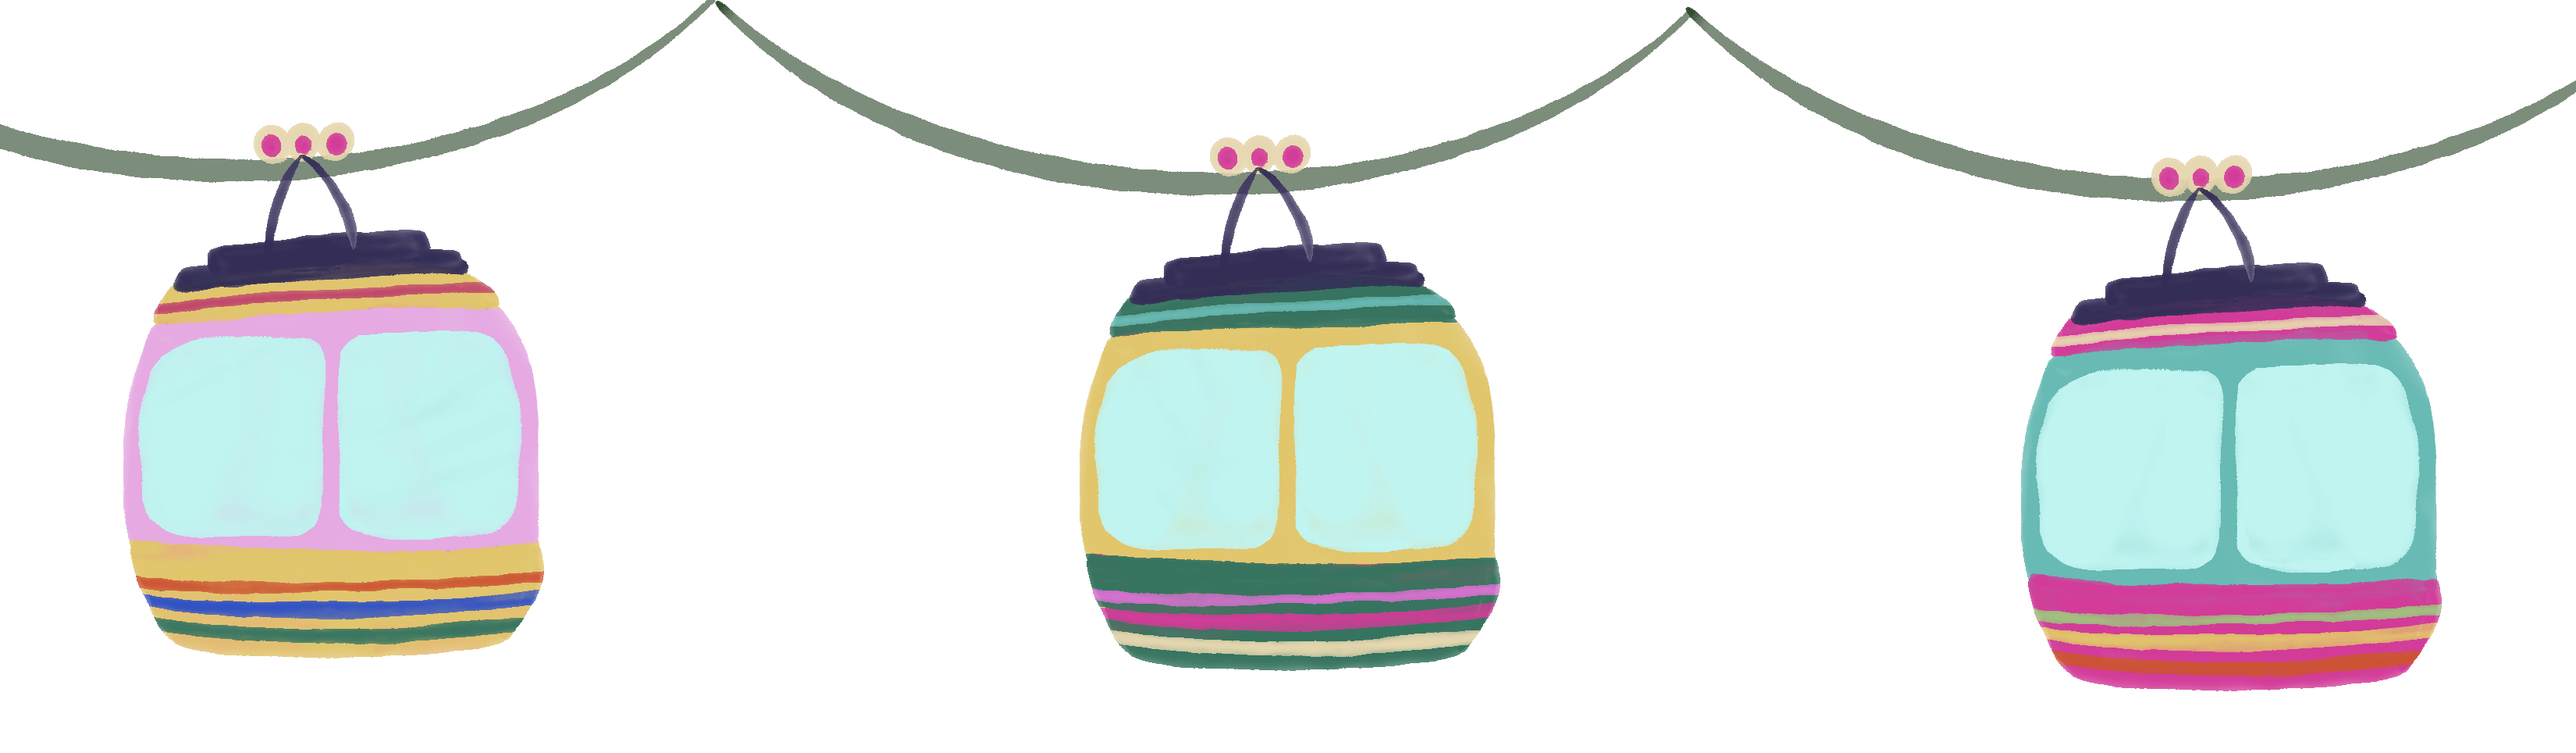 A colourful illustration of cable cars